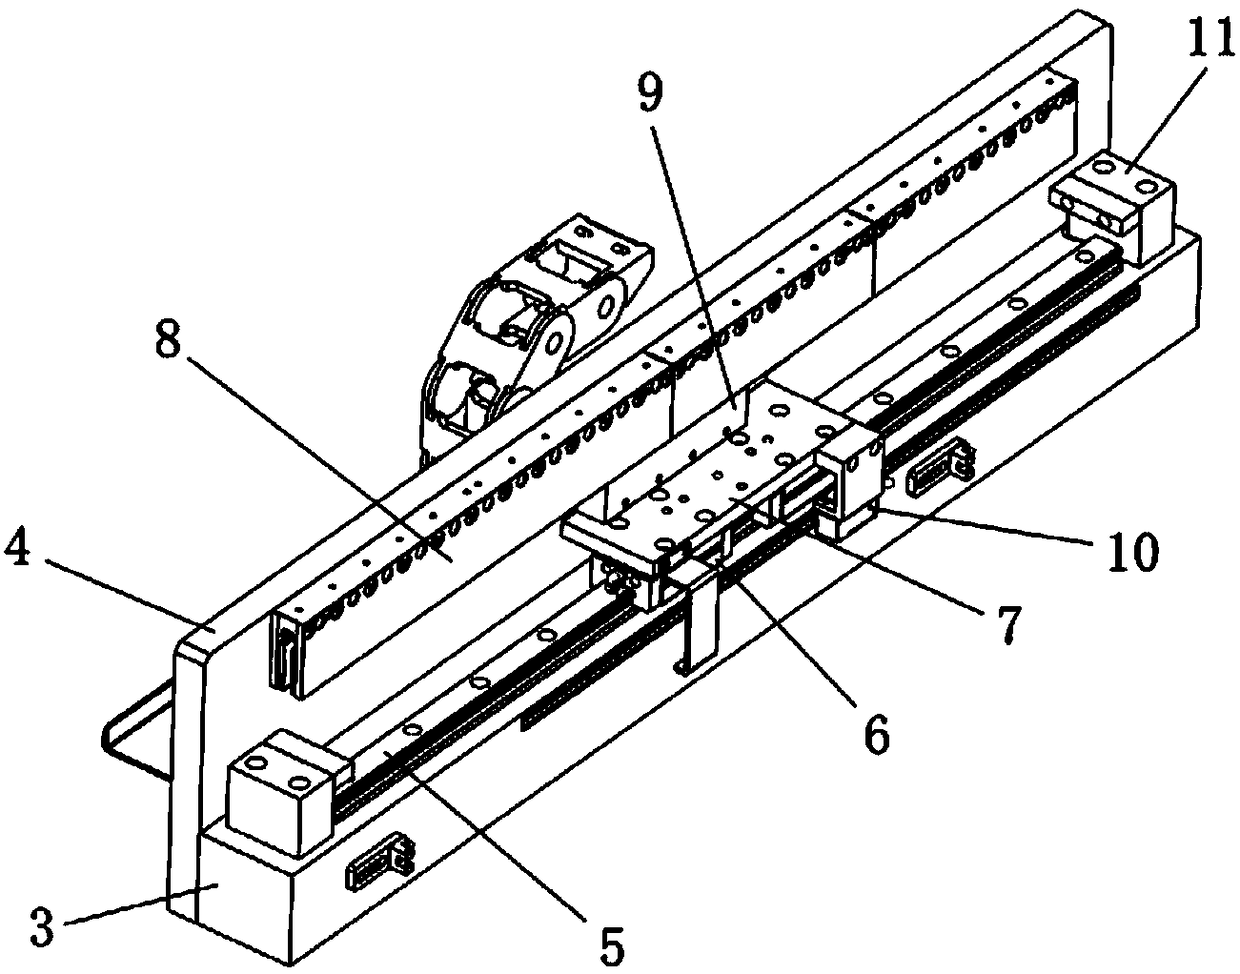 Double-drive gantry structure